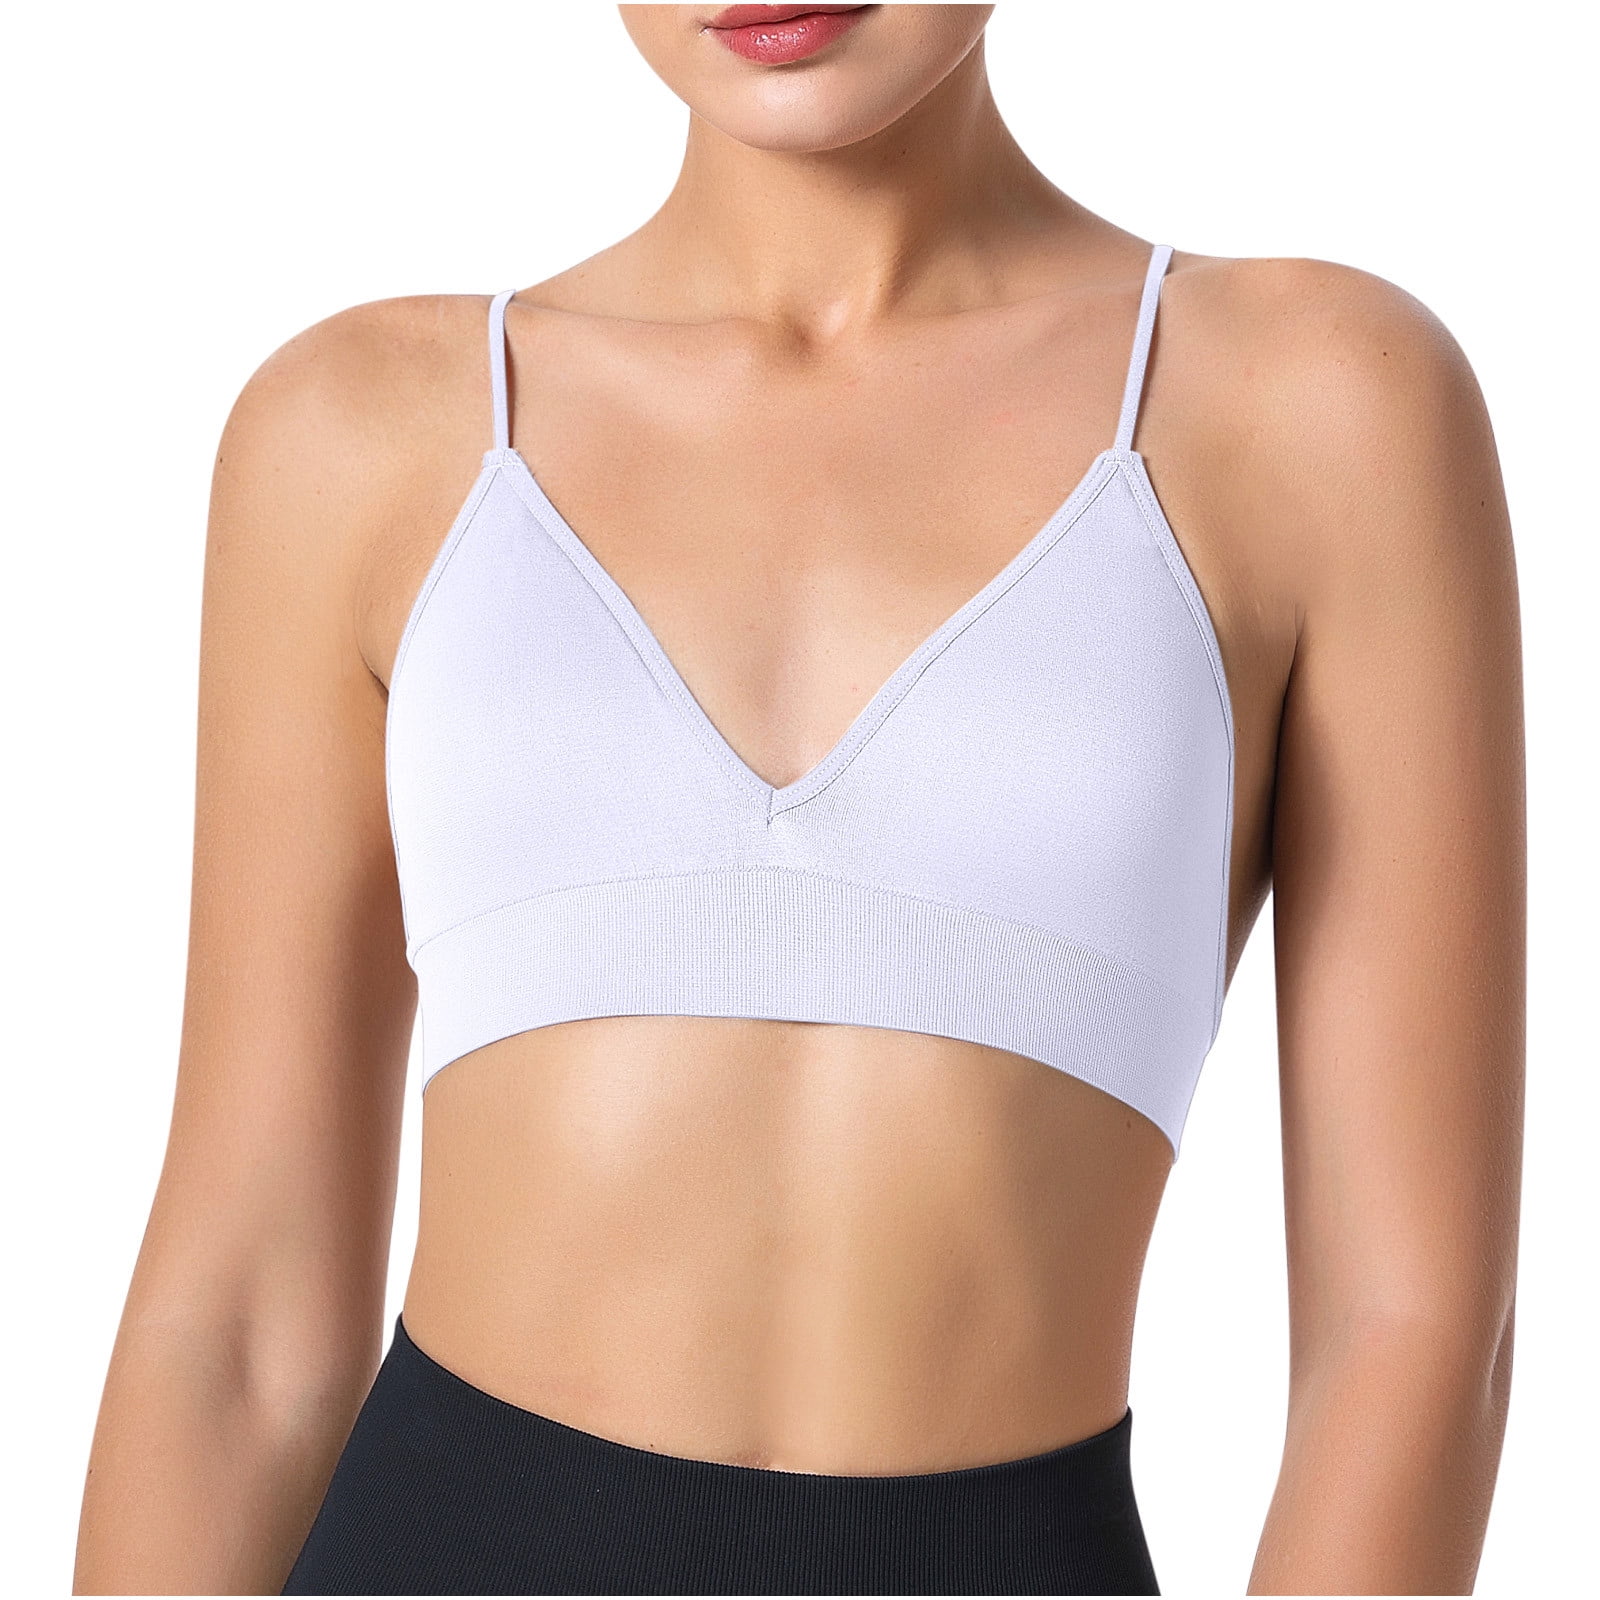 Mrat Clearance Breezies Bras Clearance Women Yoga Solid Sleeveless Cold  Shoulder Casual Tanks Blouse Tops Intimates Full Support Non-slip  Convertible